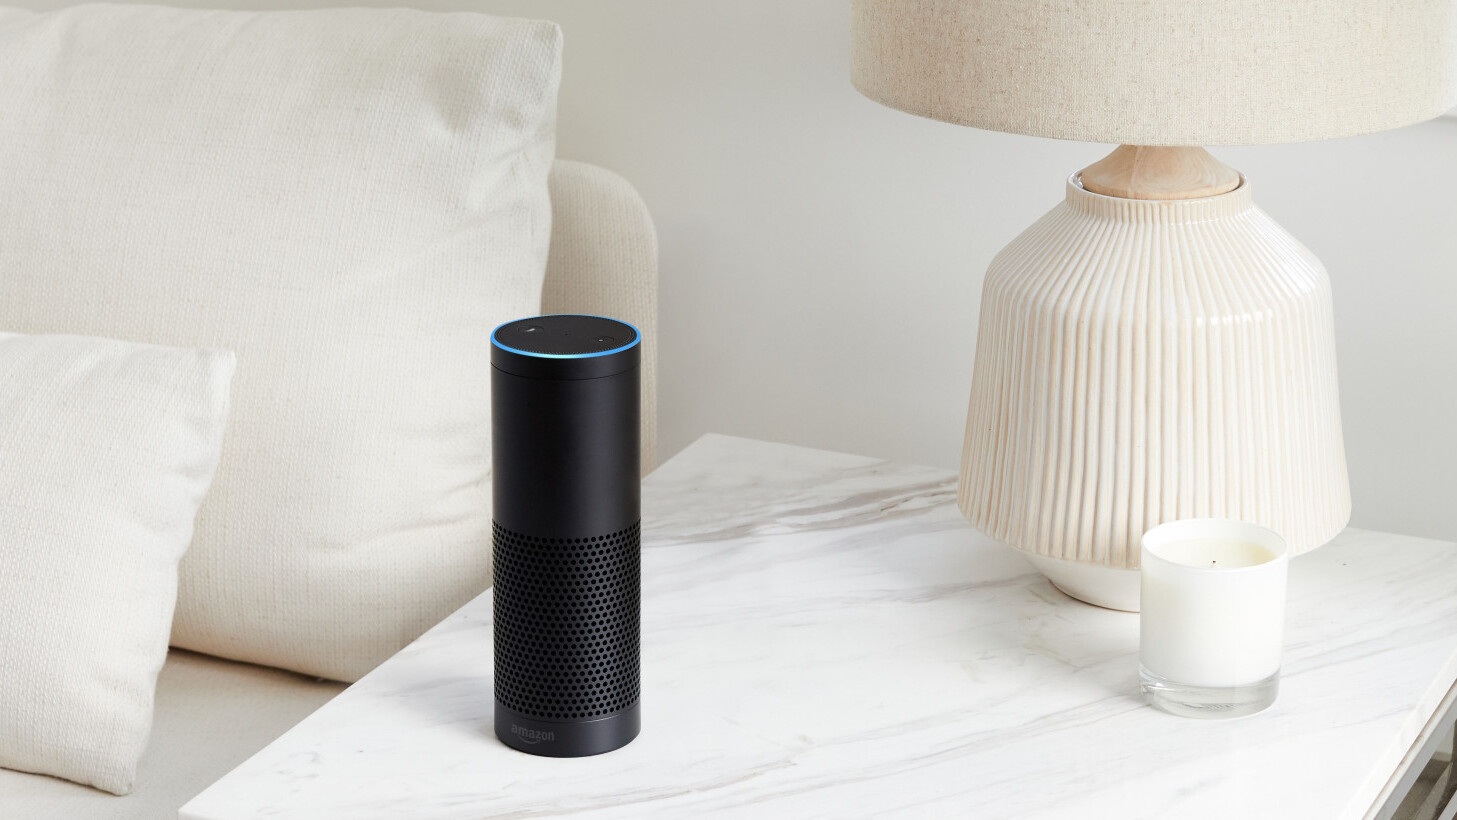 Amazon Alexa now lets you control music from your phone on Echo speakers, Chromecast-style